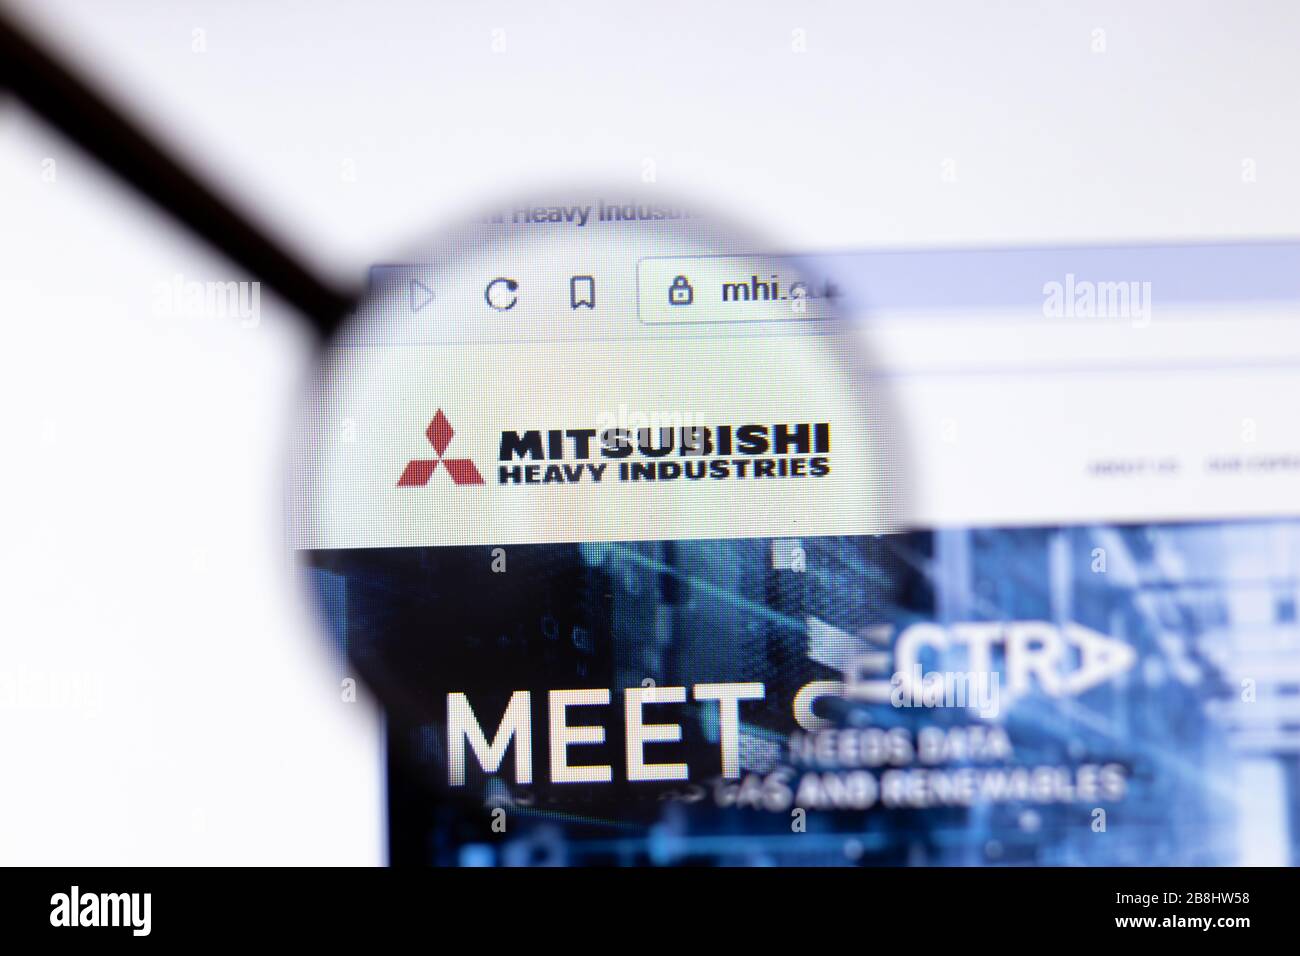 Los Angeles, California, USA - 20 March 2020: Mitsubishi Heavy Industries company logo on website page close-up on screen, Illustrative Editorial Stock Photo